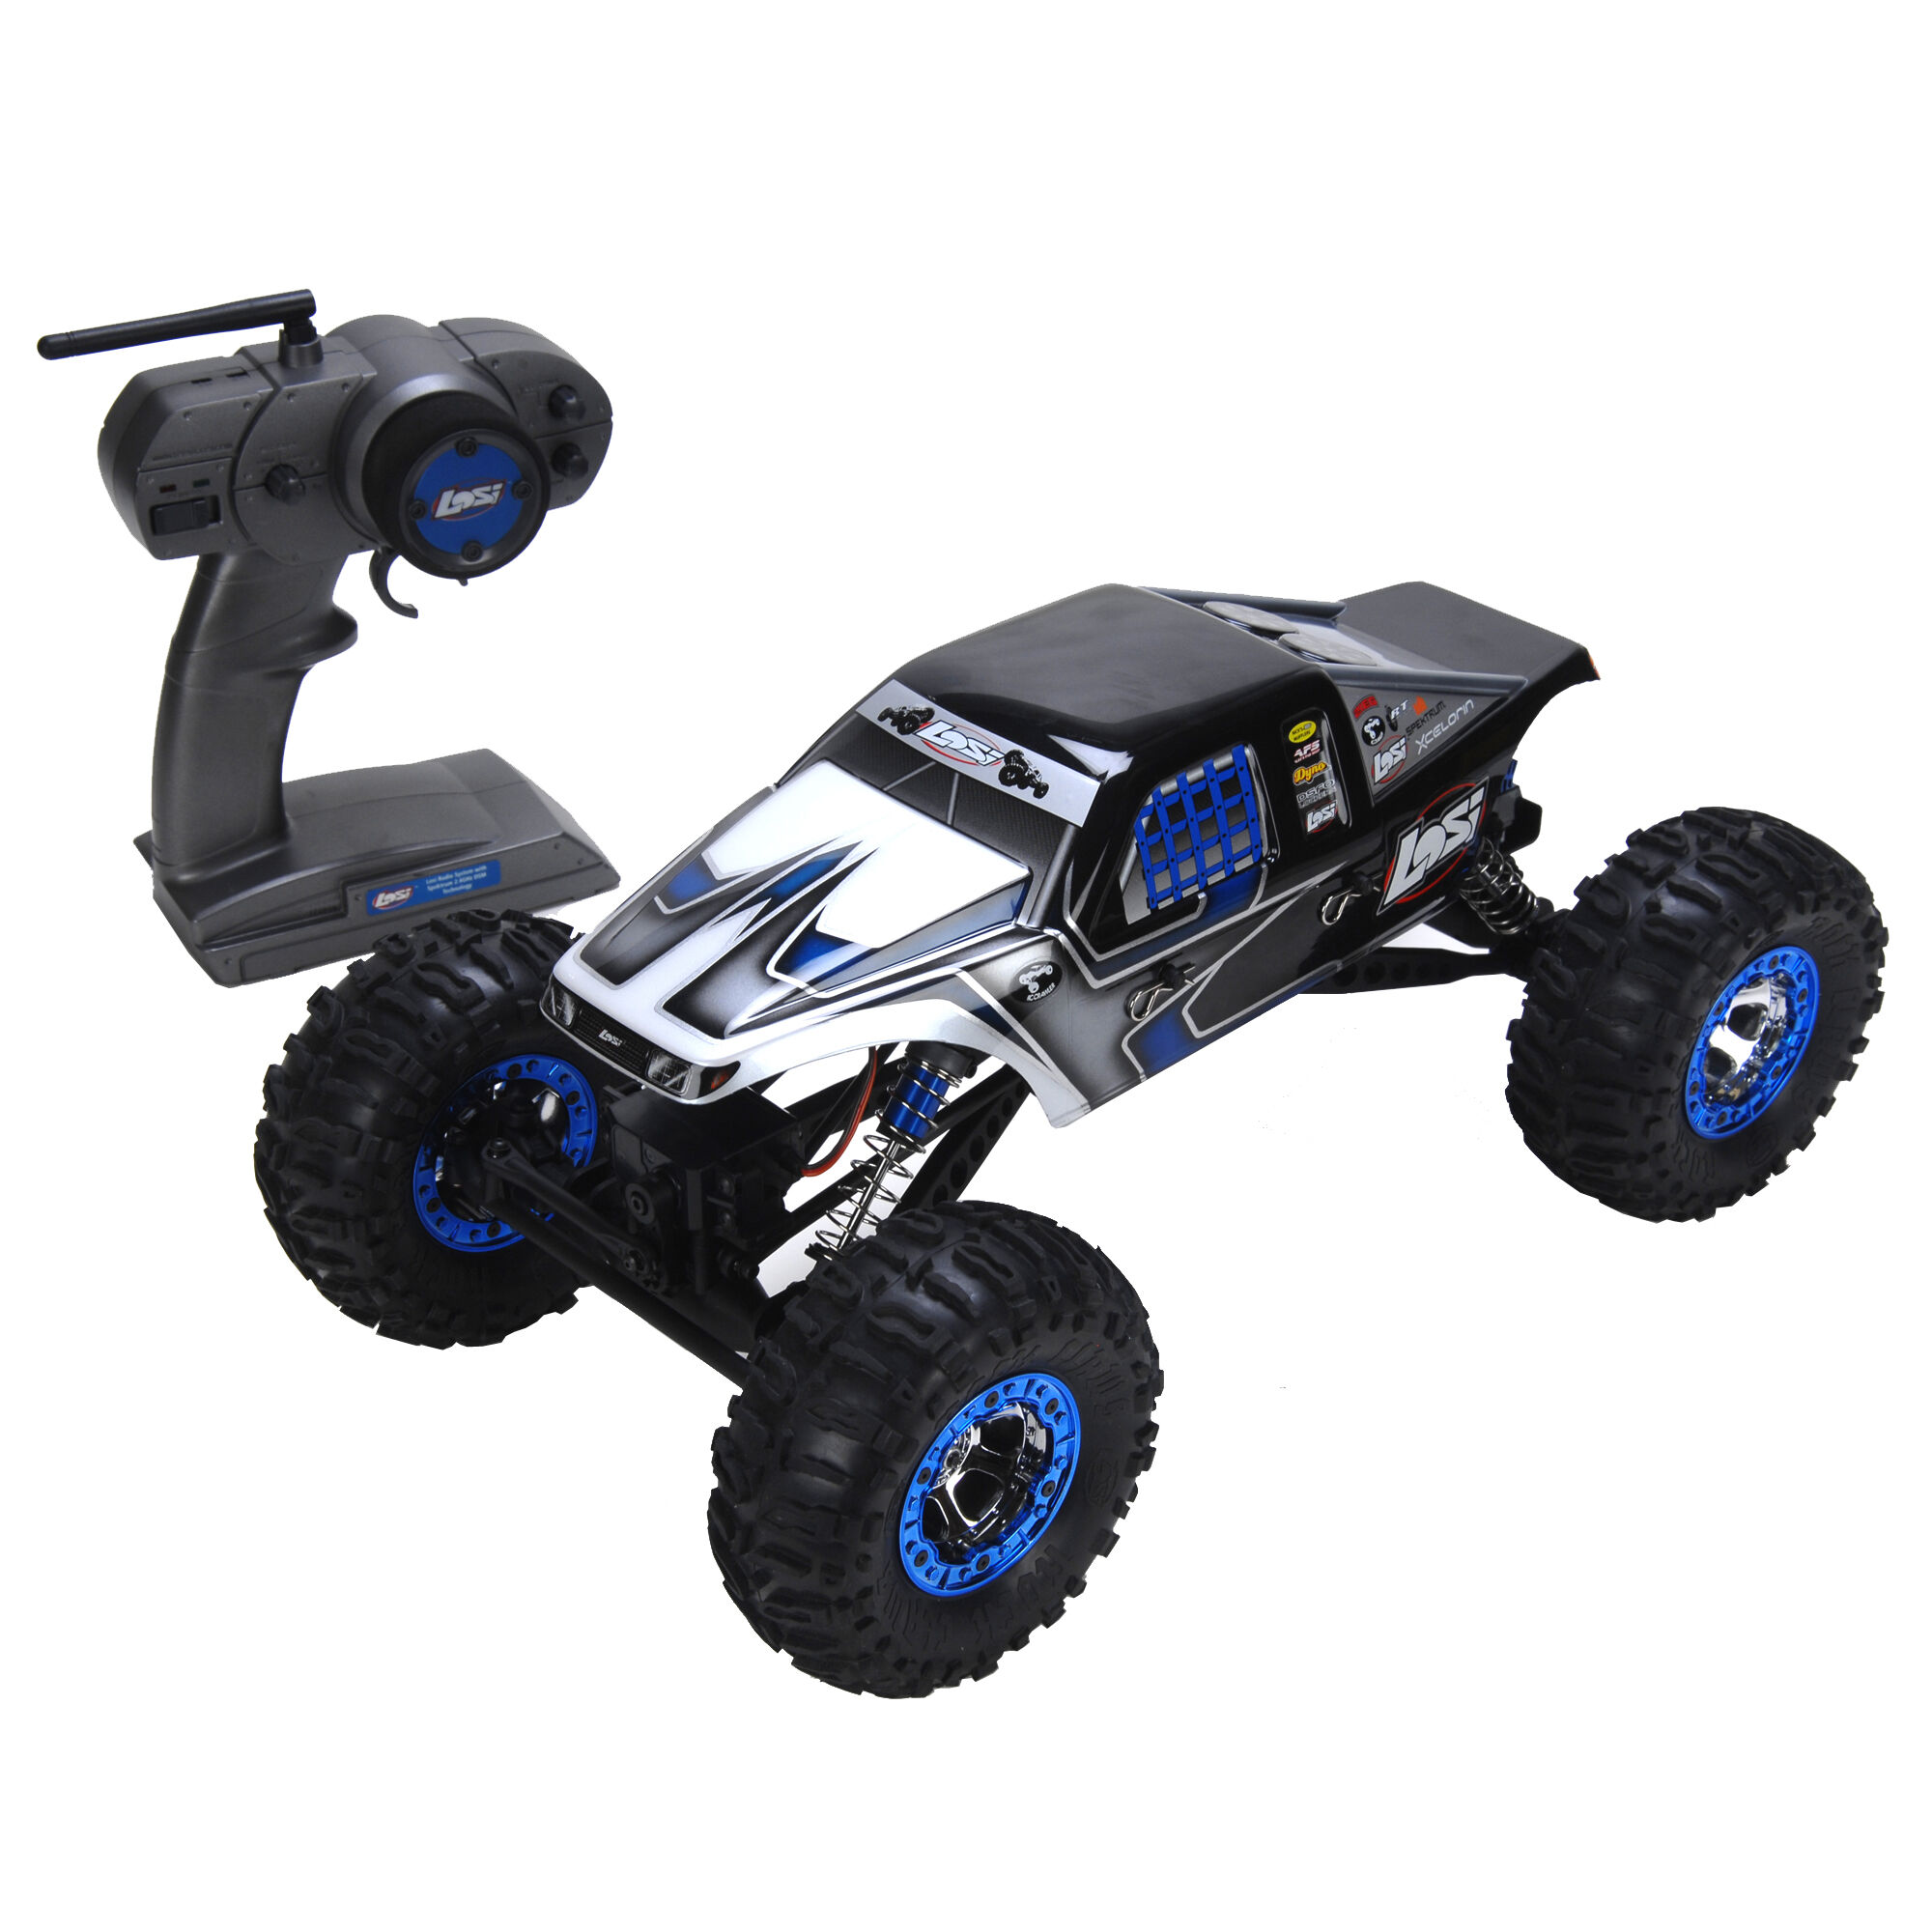 Team Losi Night Crawler 1/10 Ready To Run Black Painted Body avec décalques LOSB 8051 